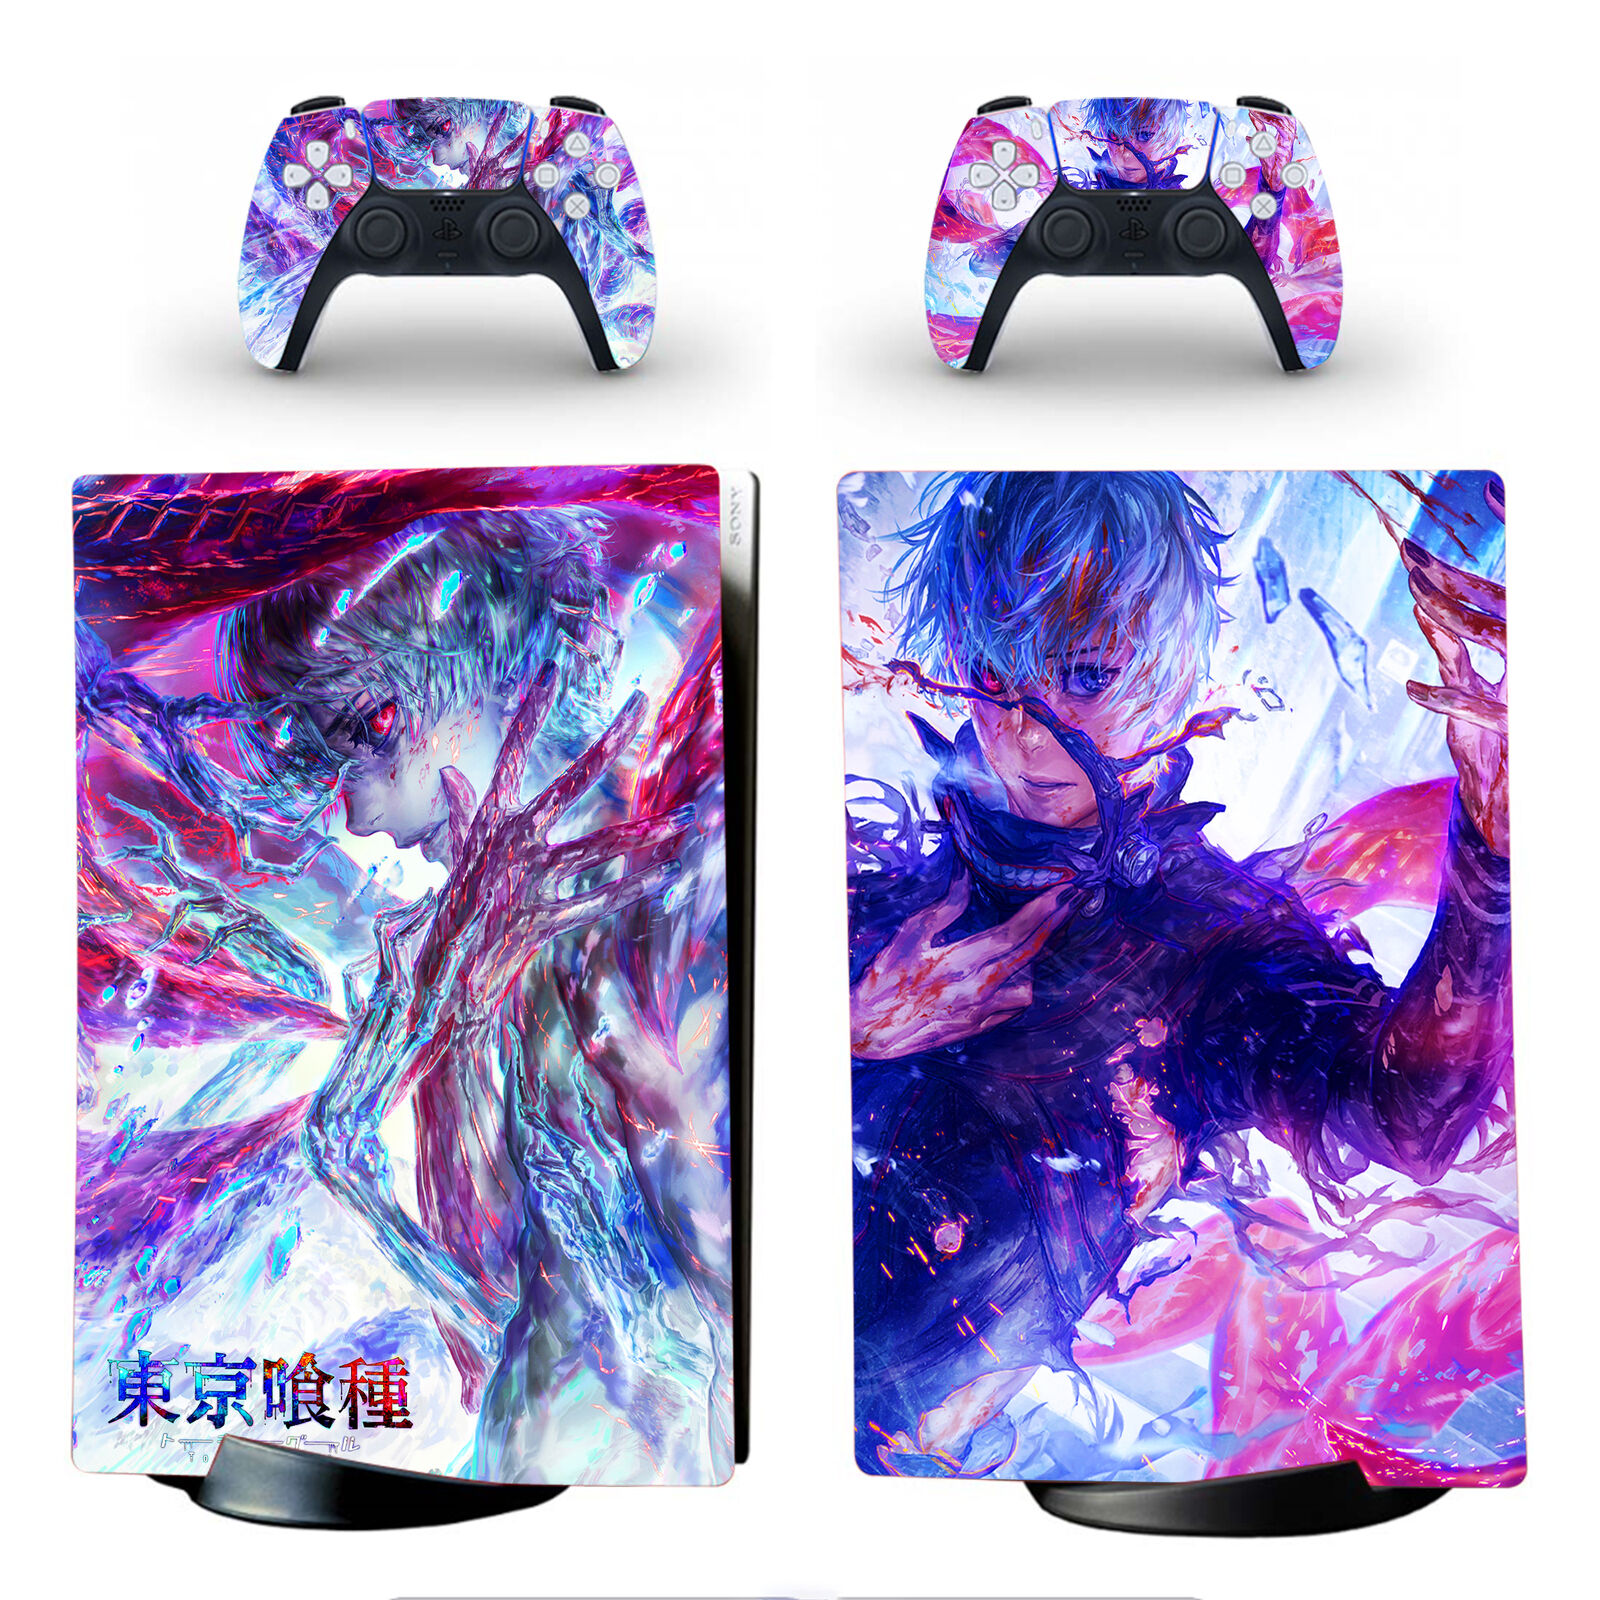 Mua BelugaDesign Kirby Boba Skin PS5 | Anime Bubble Tea Smash Dessert |  Cute Kawaii Pastel Vinyl Cover Wrap Sticker Full Set Console Controller |  Compatible with Sony Playstation 5 (PS5 Disc,